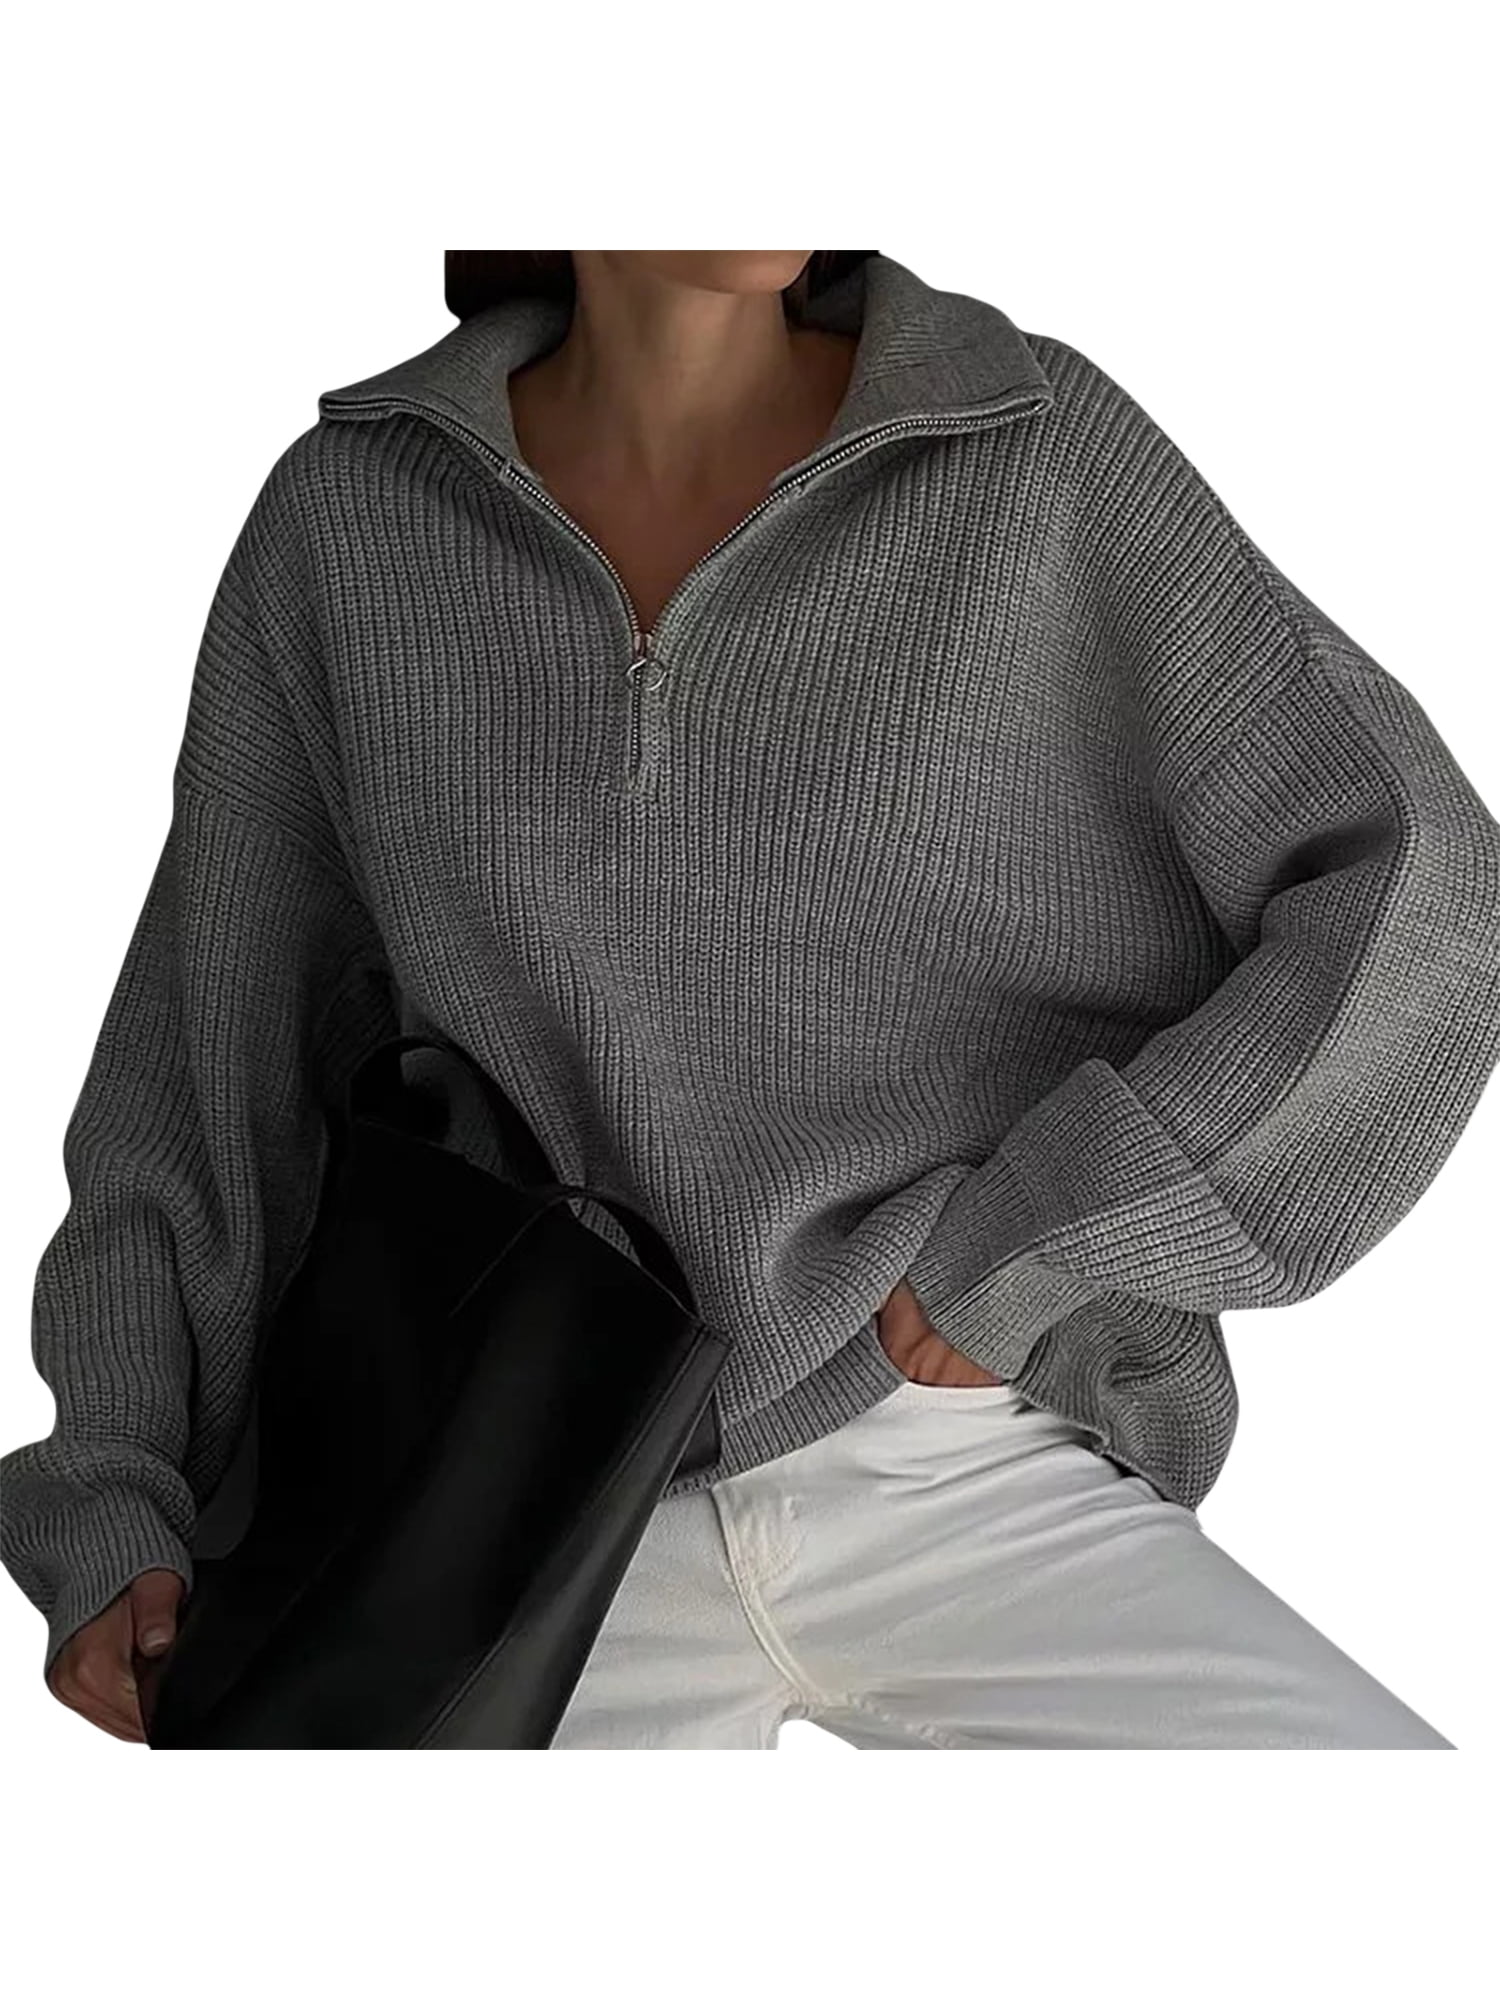 AMILIEe Collar Ribbed Knitwear V-Neck Pullover Jumper Women Tops Sleeve Knit Lapel Long Sweaters